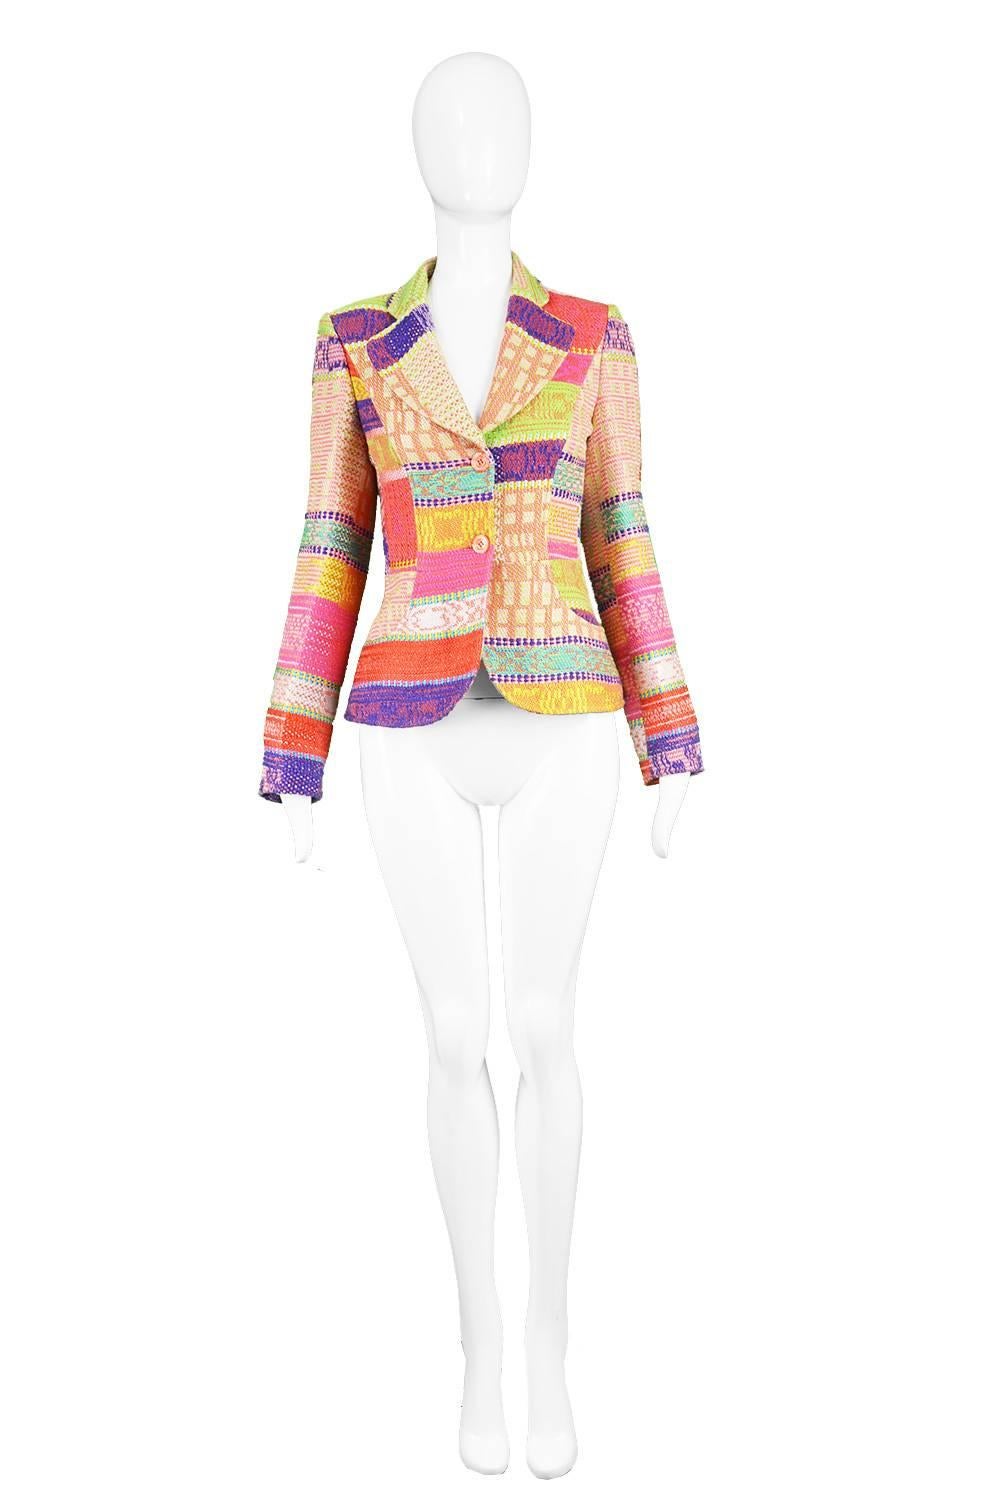 Christian Lacroix Brightly Multicolored Woven Tapestry Women S Blazer Jacket At 1stdibs